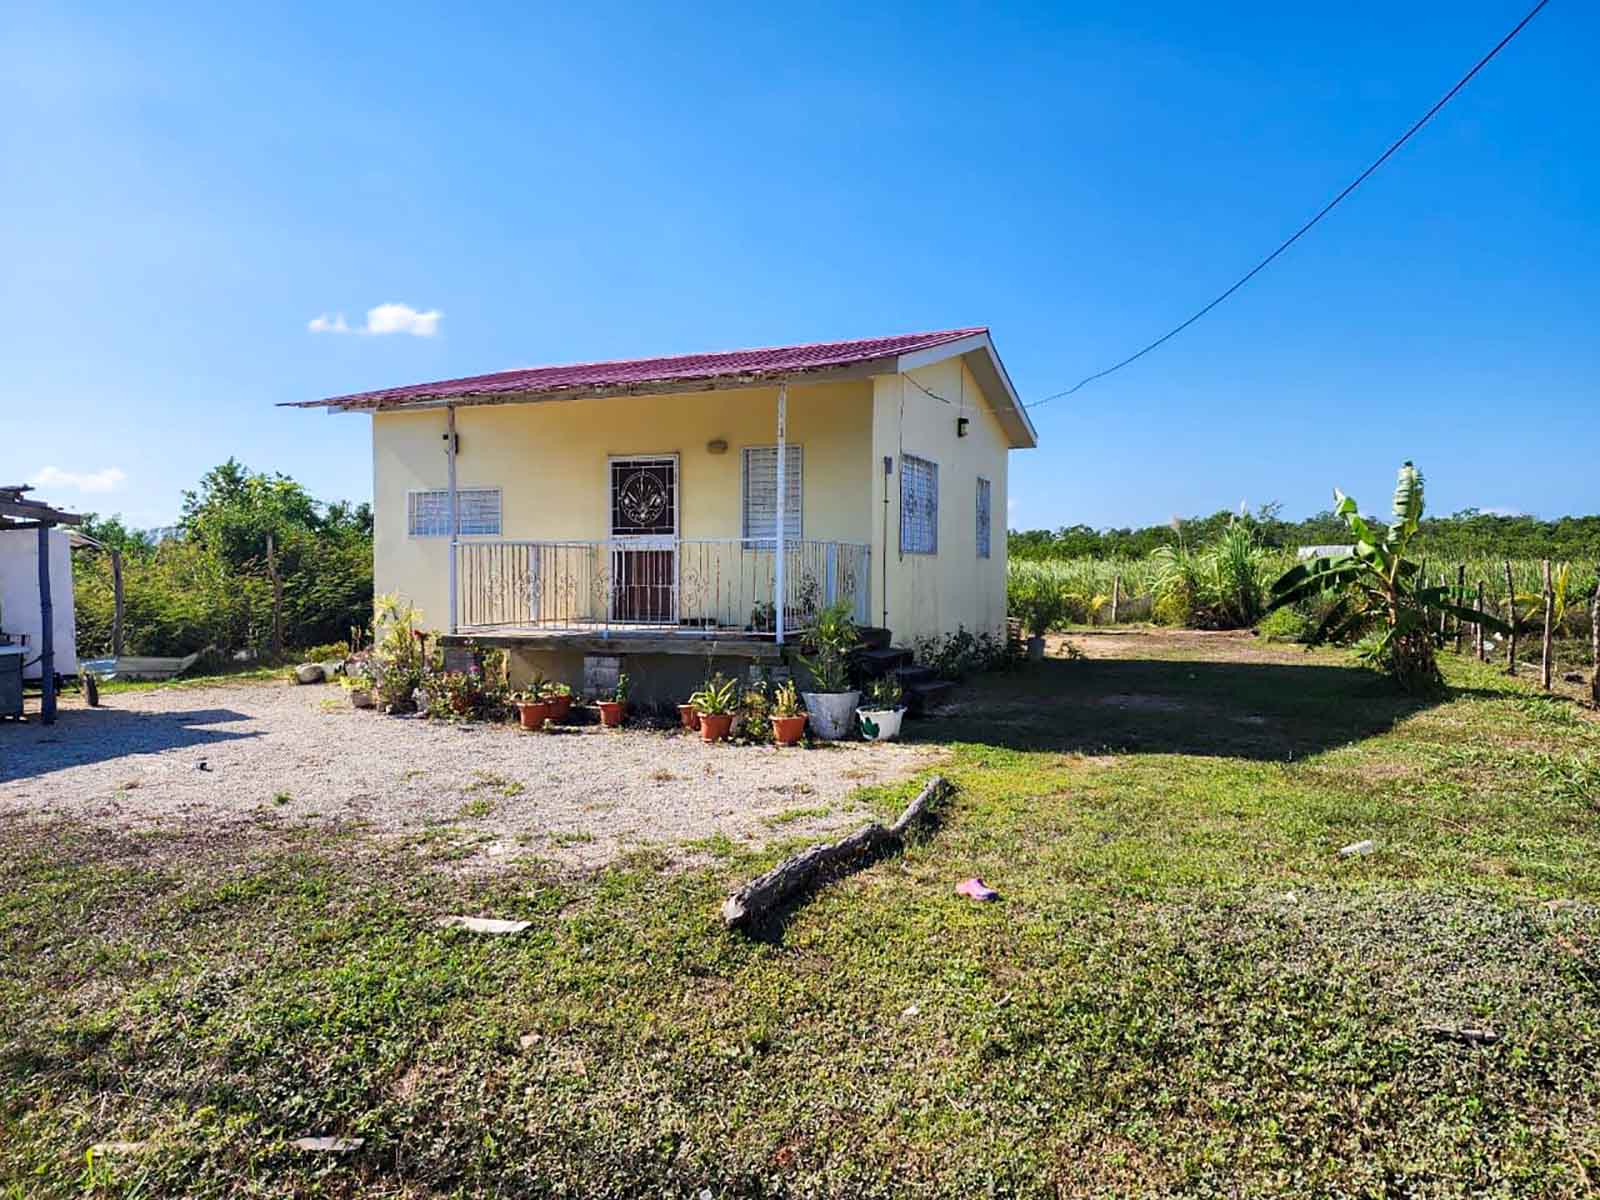 FOR RENT: 2 Bed House in Belama Phase 4, Belize City